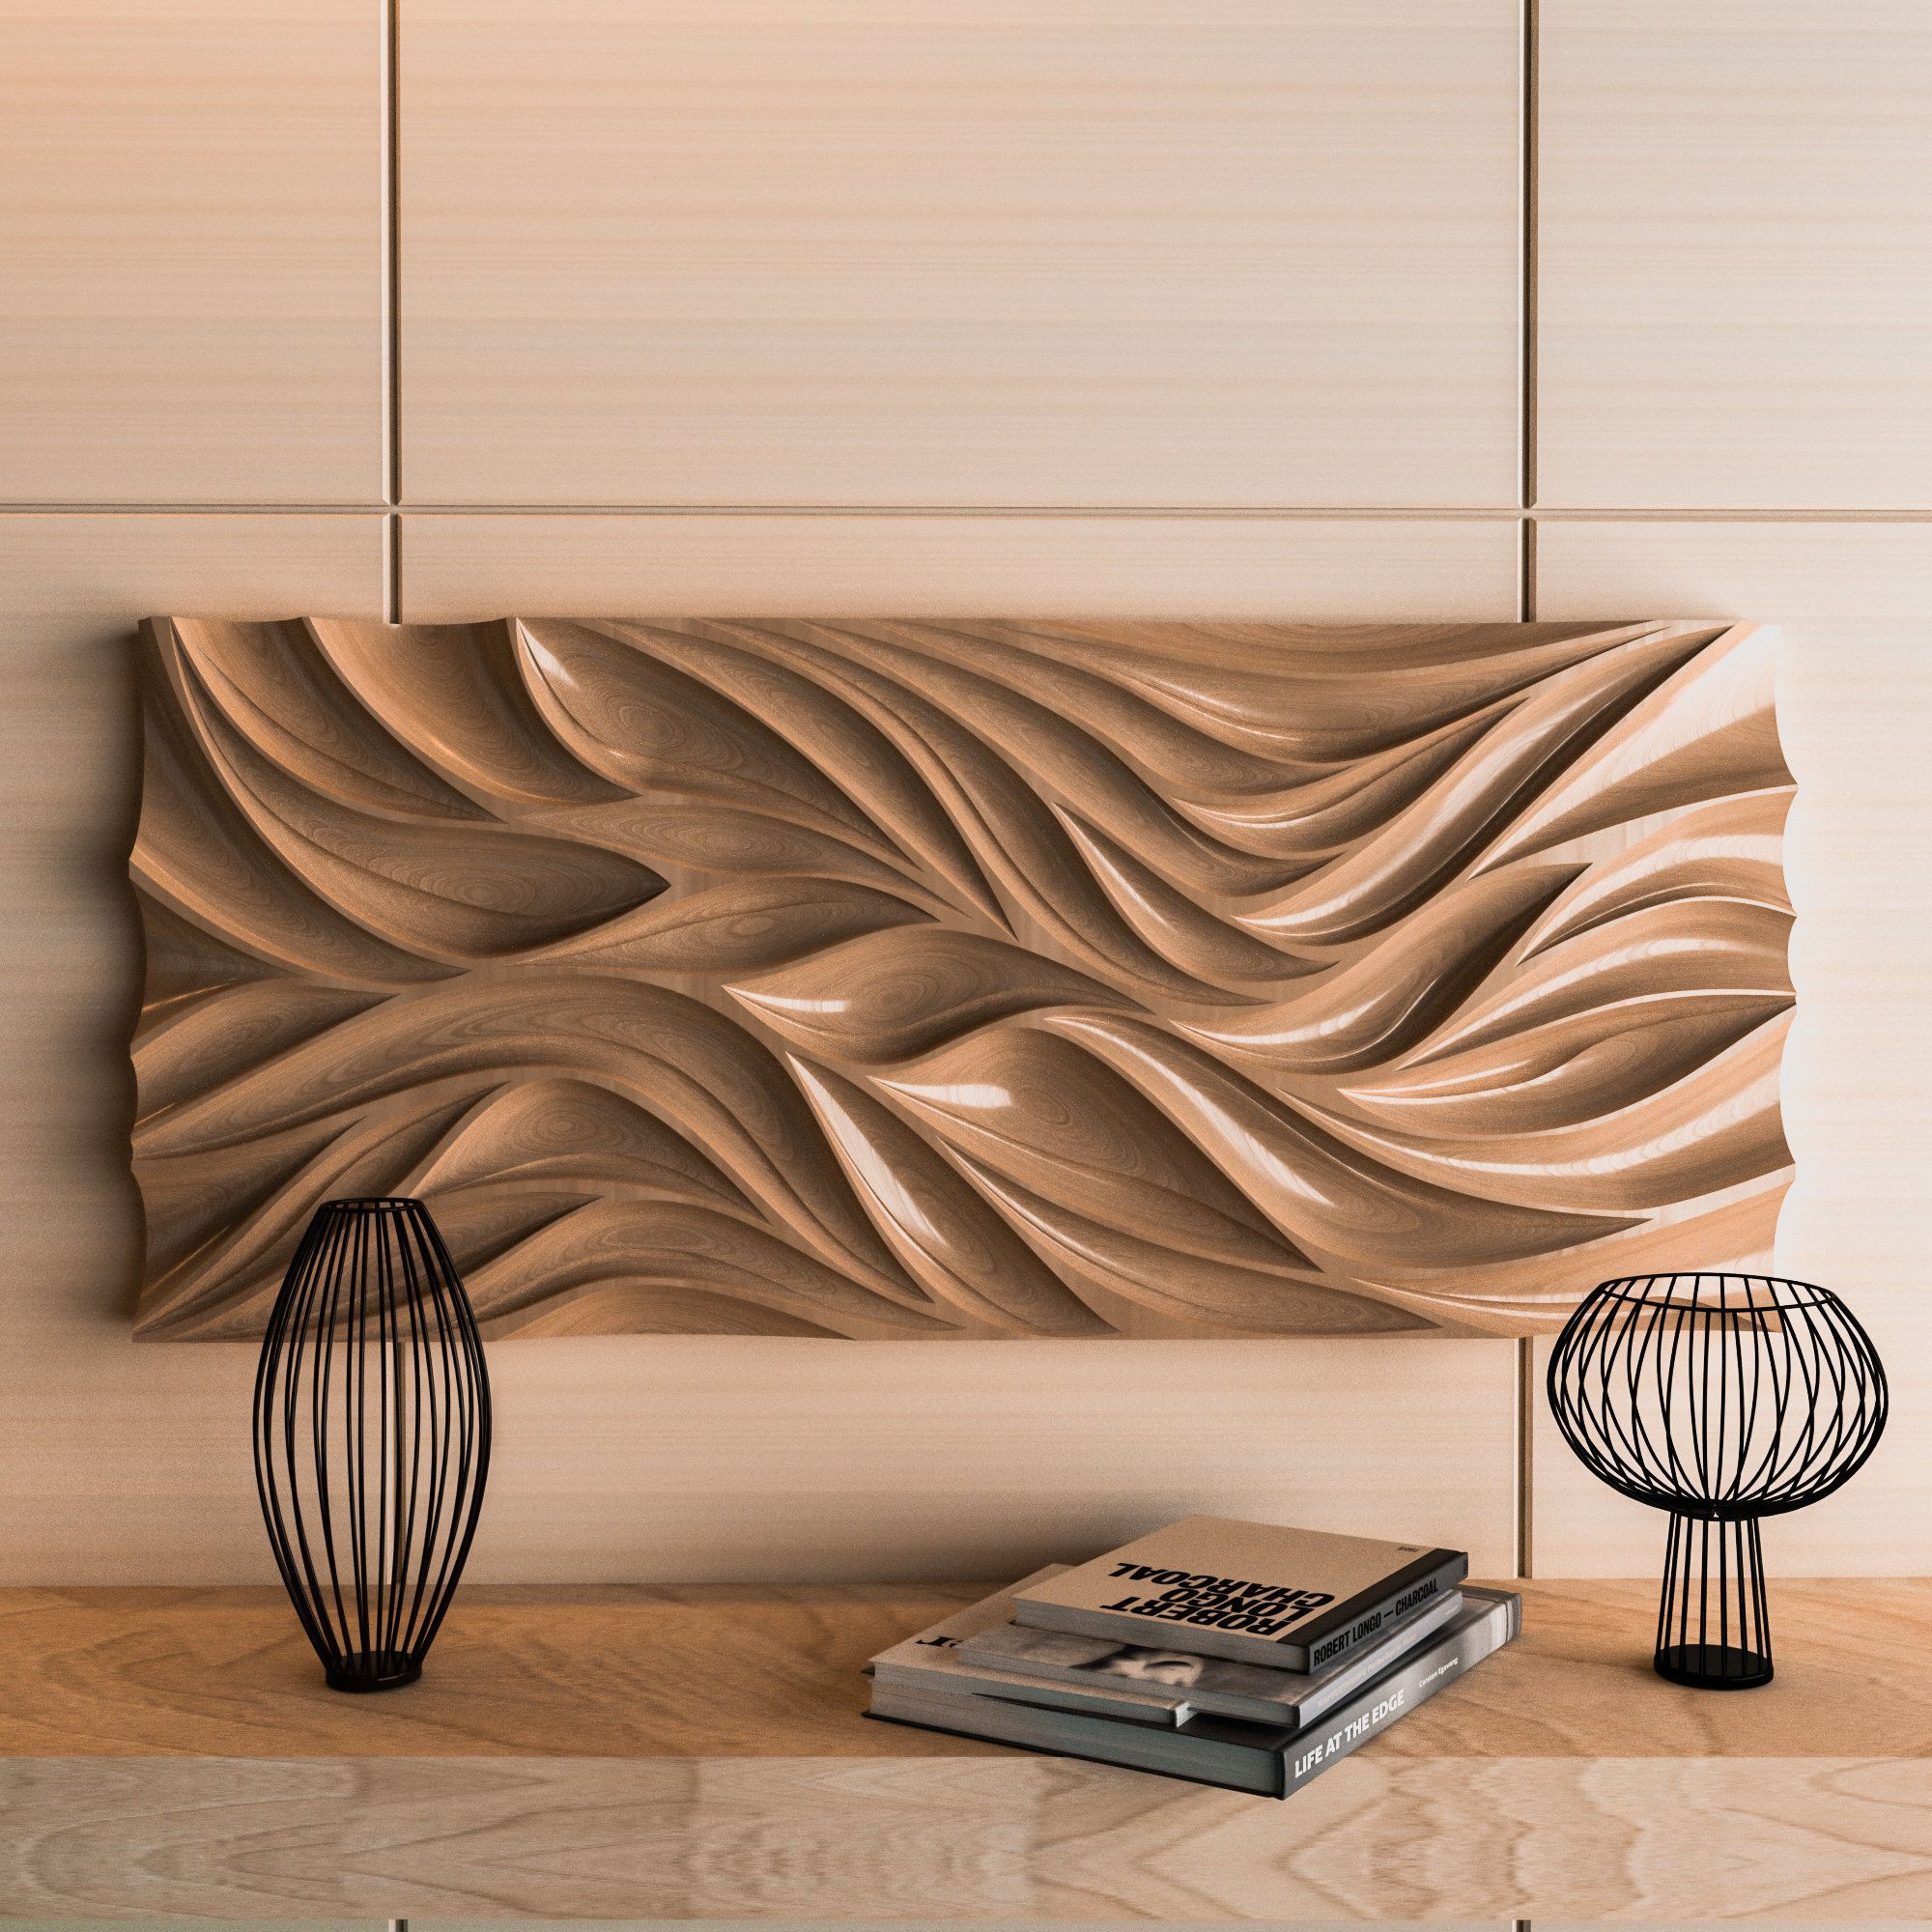 3d Model Of Wall Panels Cnc Panels Cnc Router File 3d Stl Pertaining To Newest Minimalist Wood Wall Art (View 16 of 20)